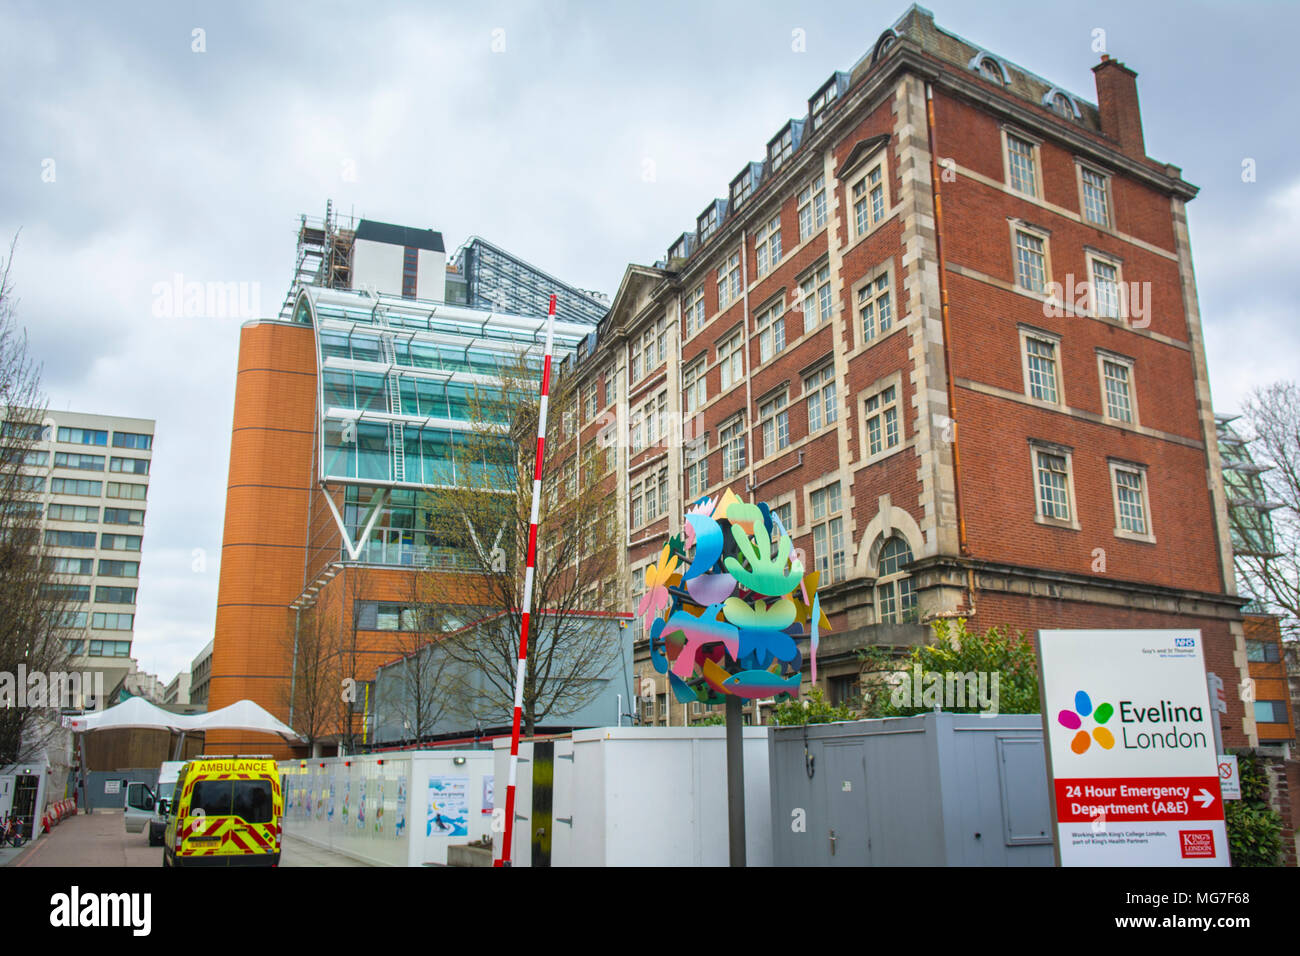 Exterior of Evelina Pediactirc hospital, part of Guys & St Thomasl, a large NHS teaching hospital by Westminster, Bridge in central London Stock Photo